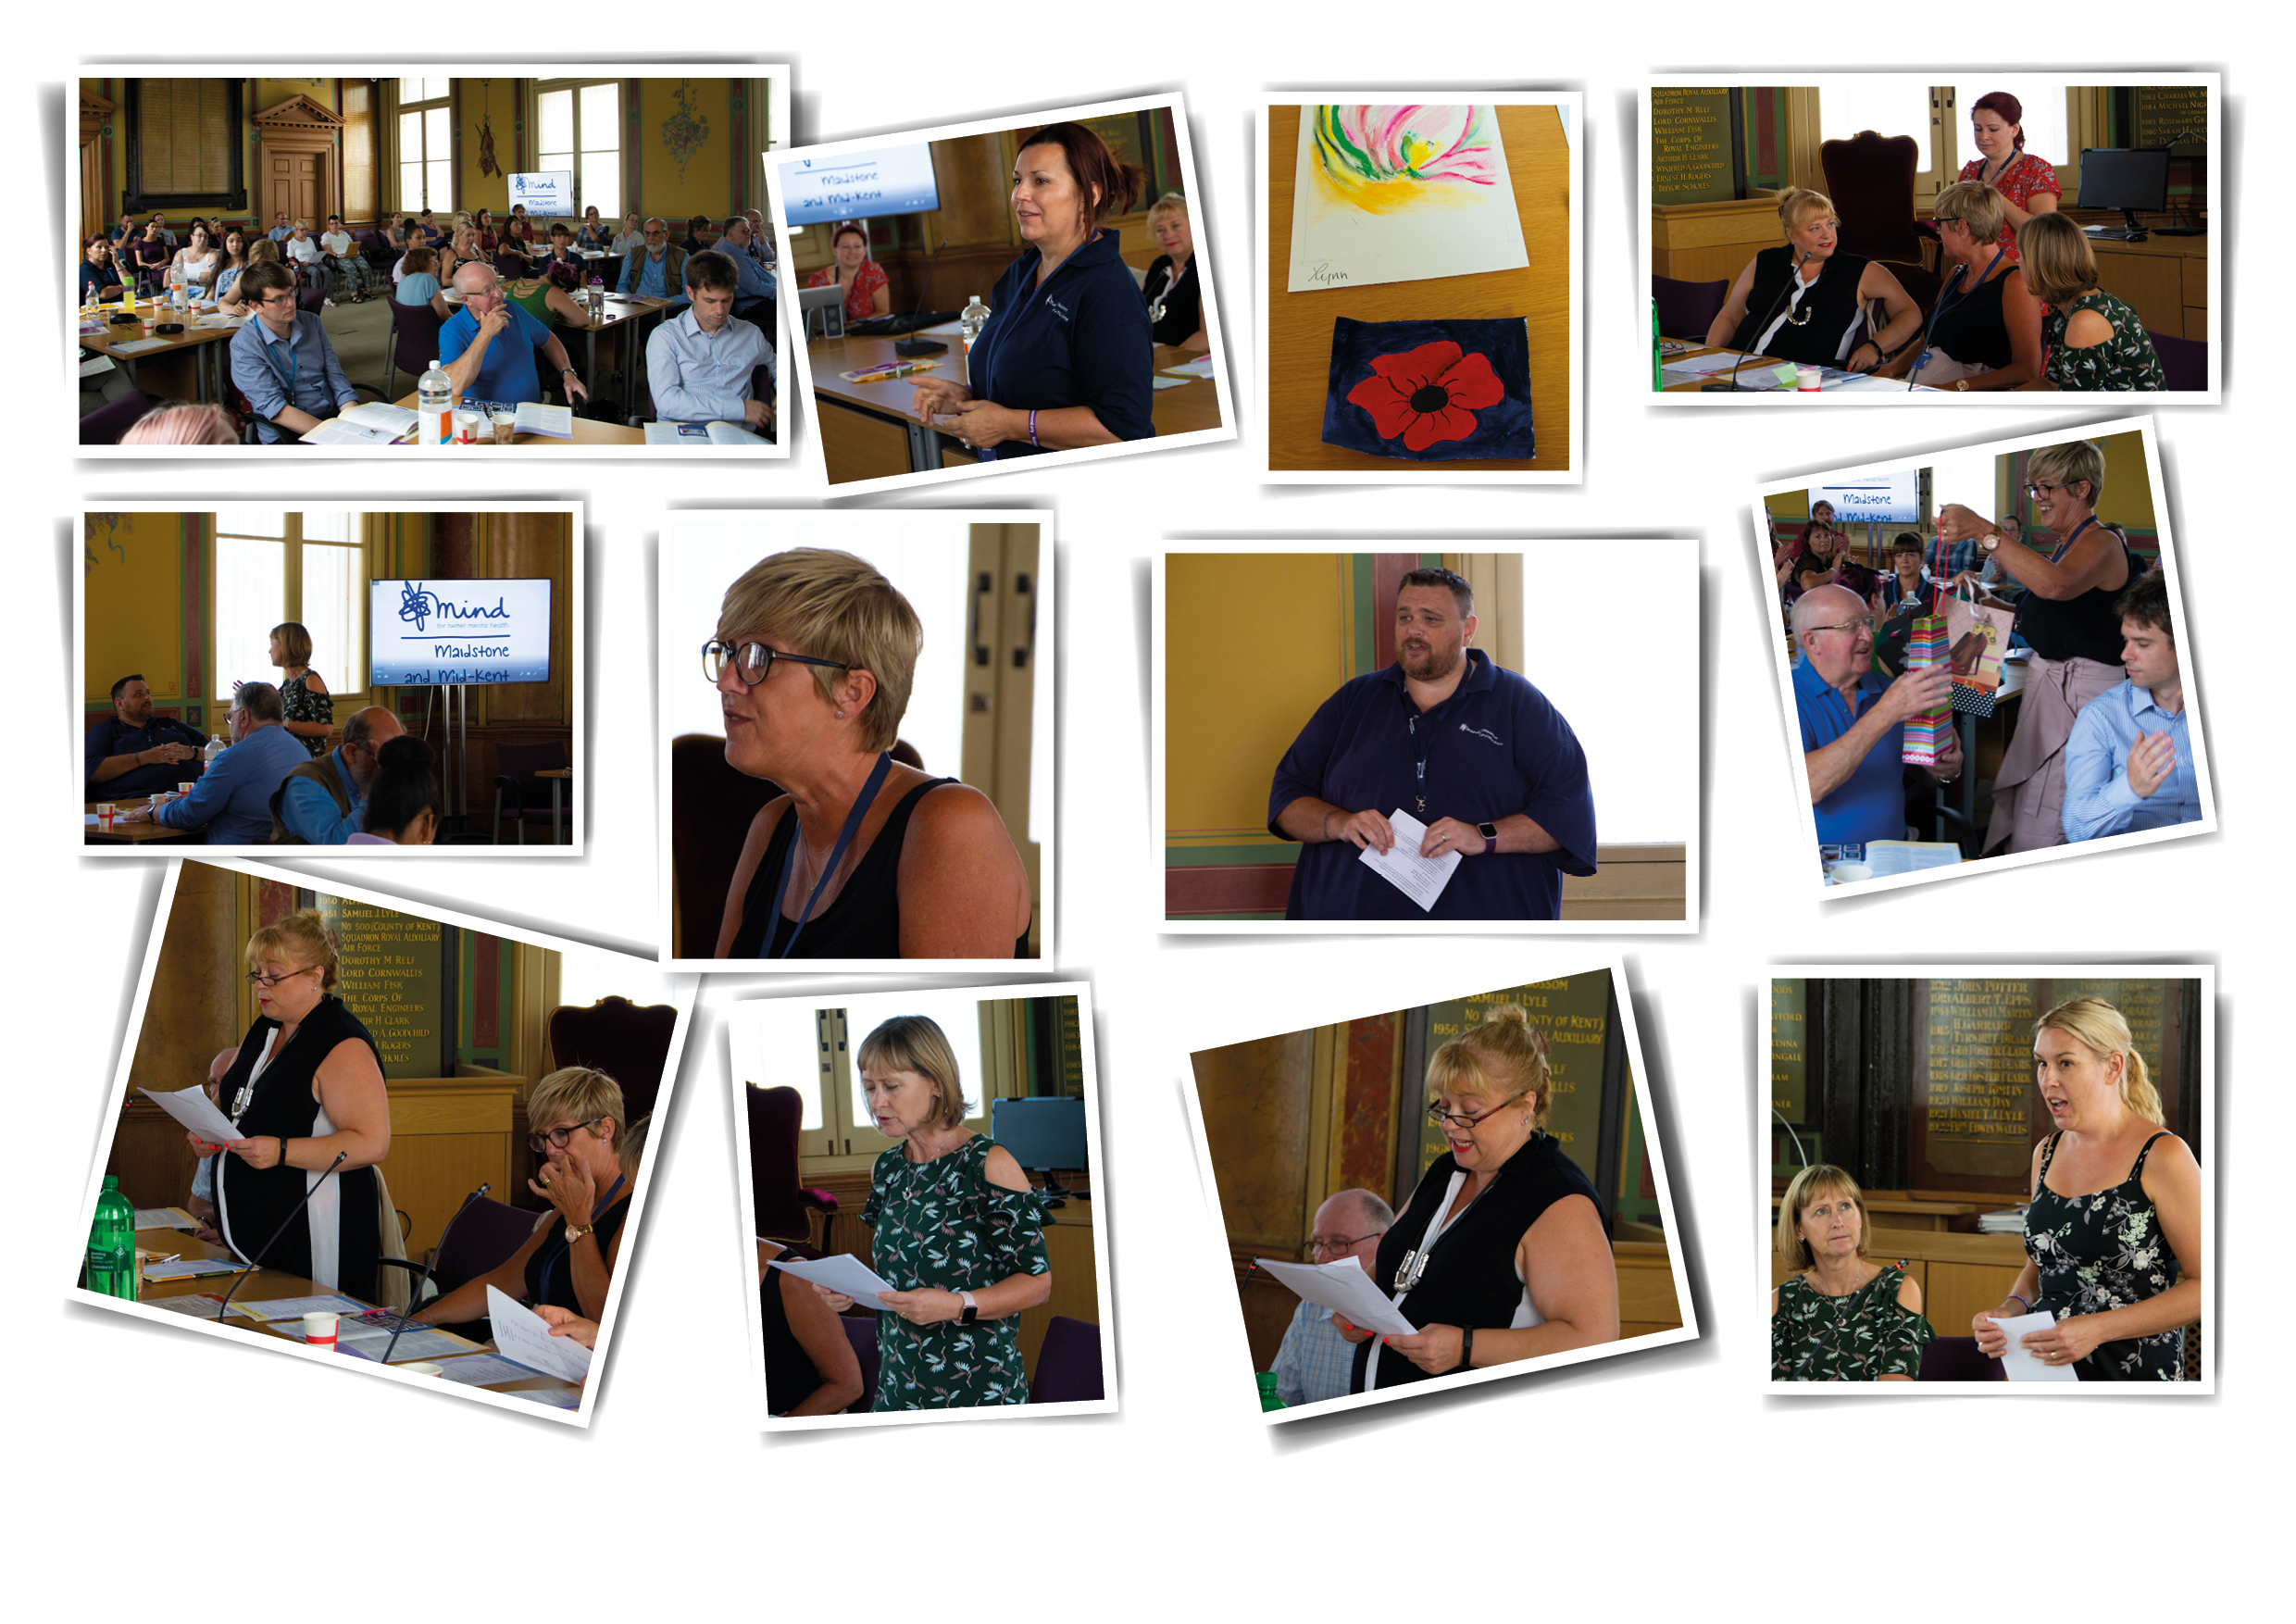 2018 AGM in Maidstone. Photos from our 2018 AGM in Maidstone. First photograph shows the audience sitting in the council chamber at Maidstone Town Hall. Second photograph shows Suzanne giving a talk at the event. The third photo is some colourful artwork of line art and a poppy presented by a service user. The fourth photo shows Sue, Julie, Hazel and Heidi conversing. The fifth photo demonstrates some of the attendees networking. The sixth photo shows Julie looking out at the audience. The seventh photo shows James giving a presentation to audiences. The eighth photo shows Julie handing a gift to a volunteer who has helped the organisation. The ninth photo shows Sue presenting the Chairperson's speech to the audience. The tenth photo shows Hazel presenting the treasurer's findings. The eleventh photo is another photo of Sue's speech. The twelfth photo is a photo of Nicky Underwood talking about Therapeutic Drumming.  